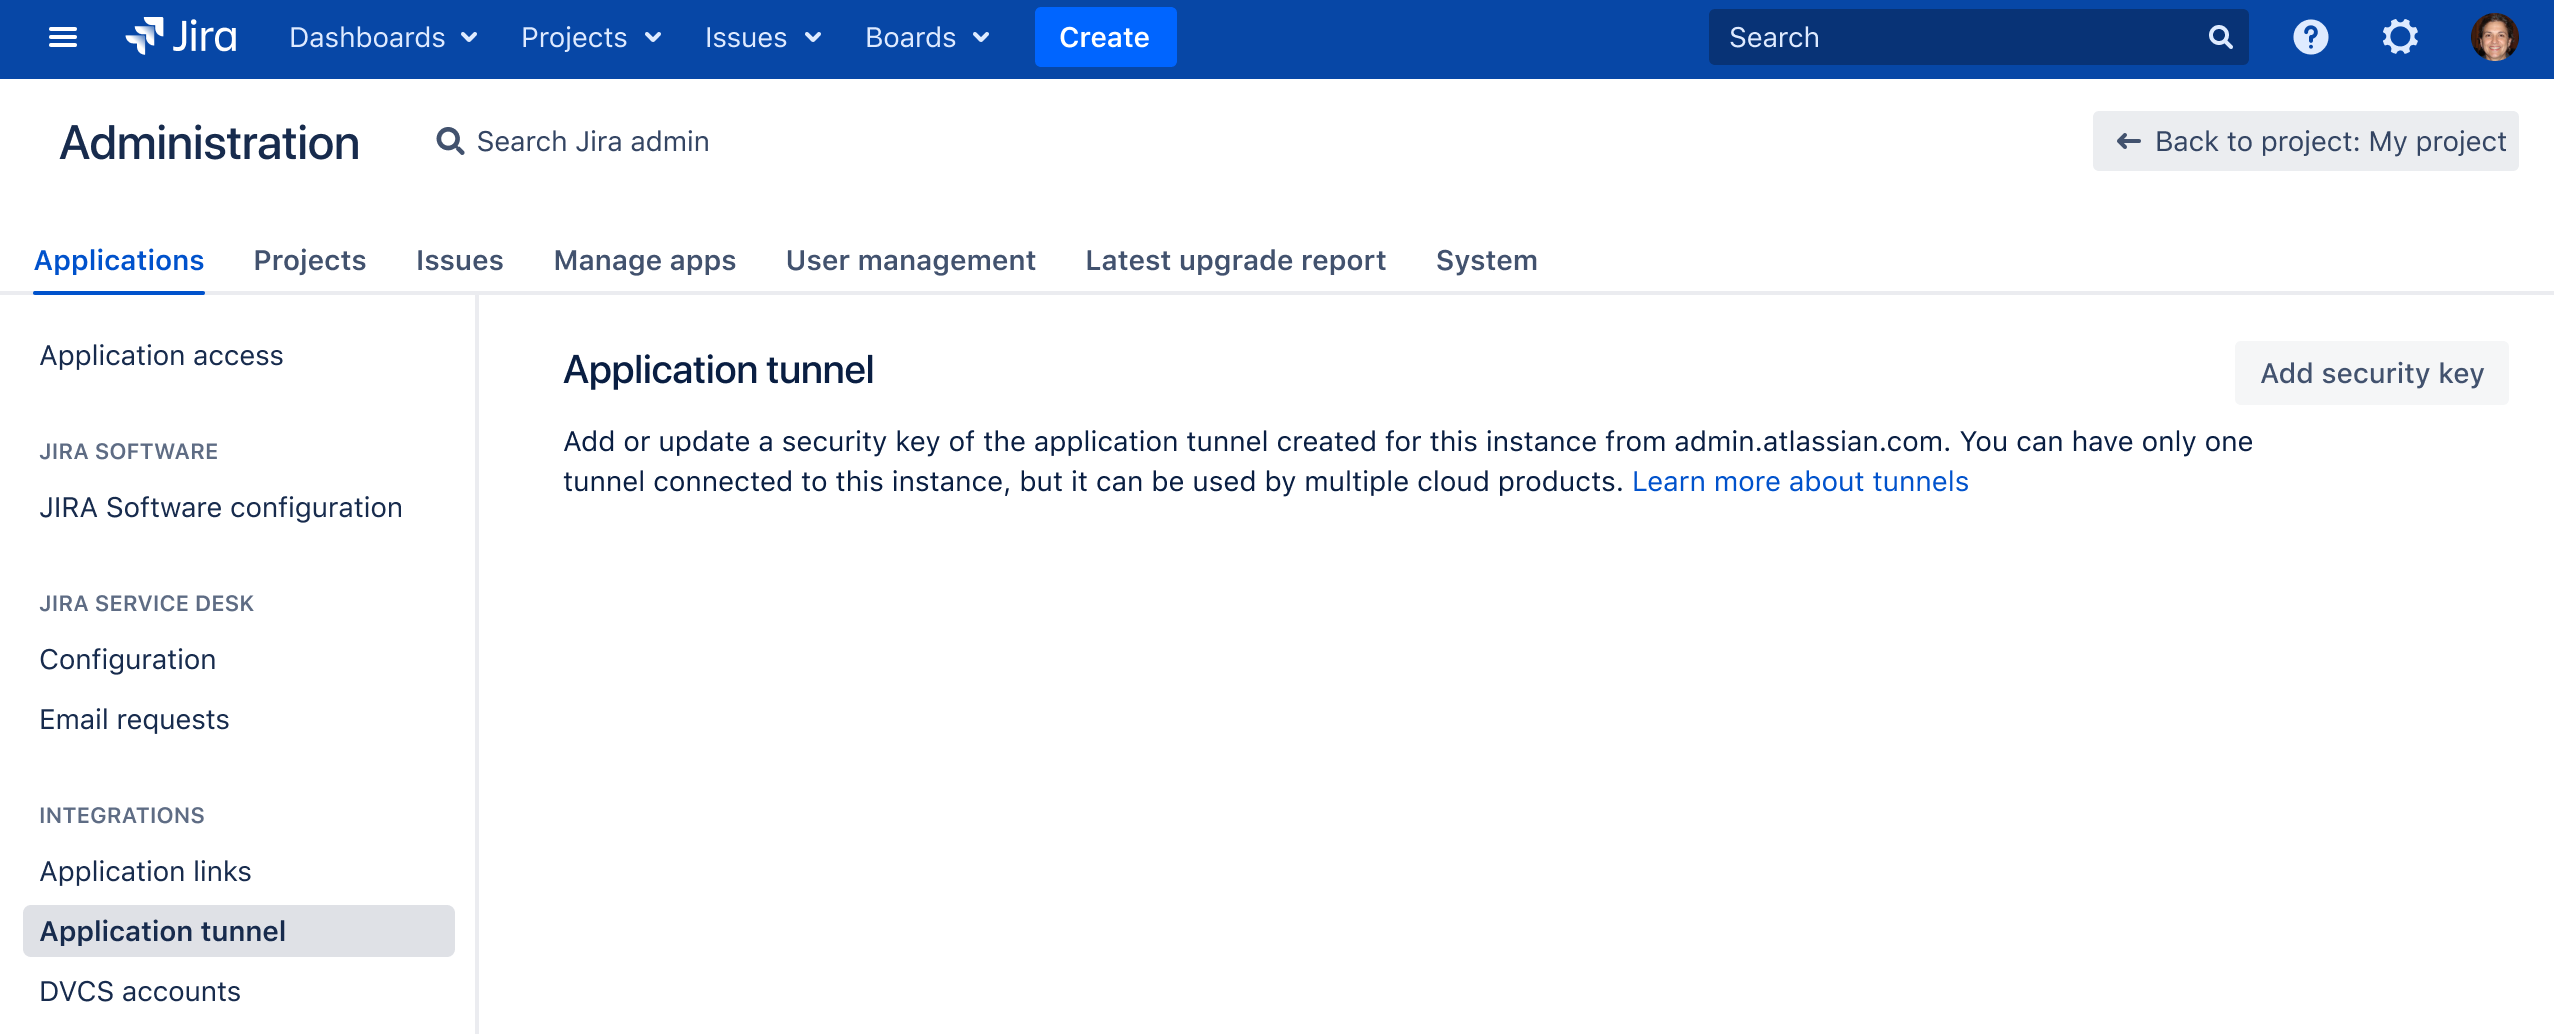 Application tunnels page after installing the Marketplace app.